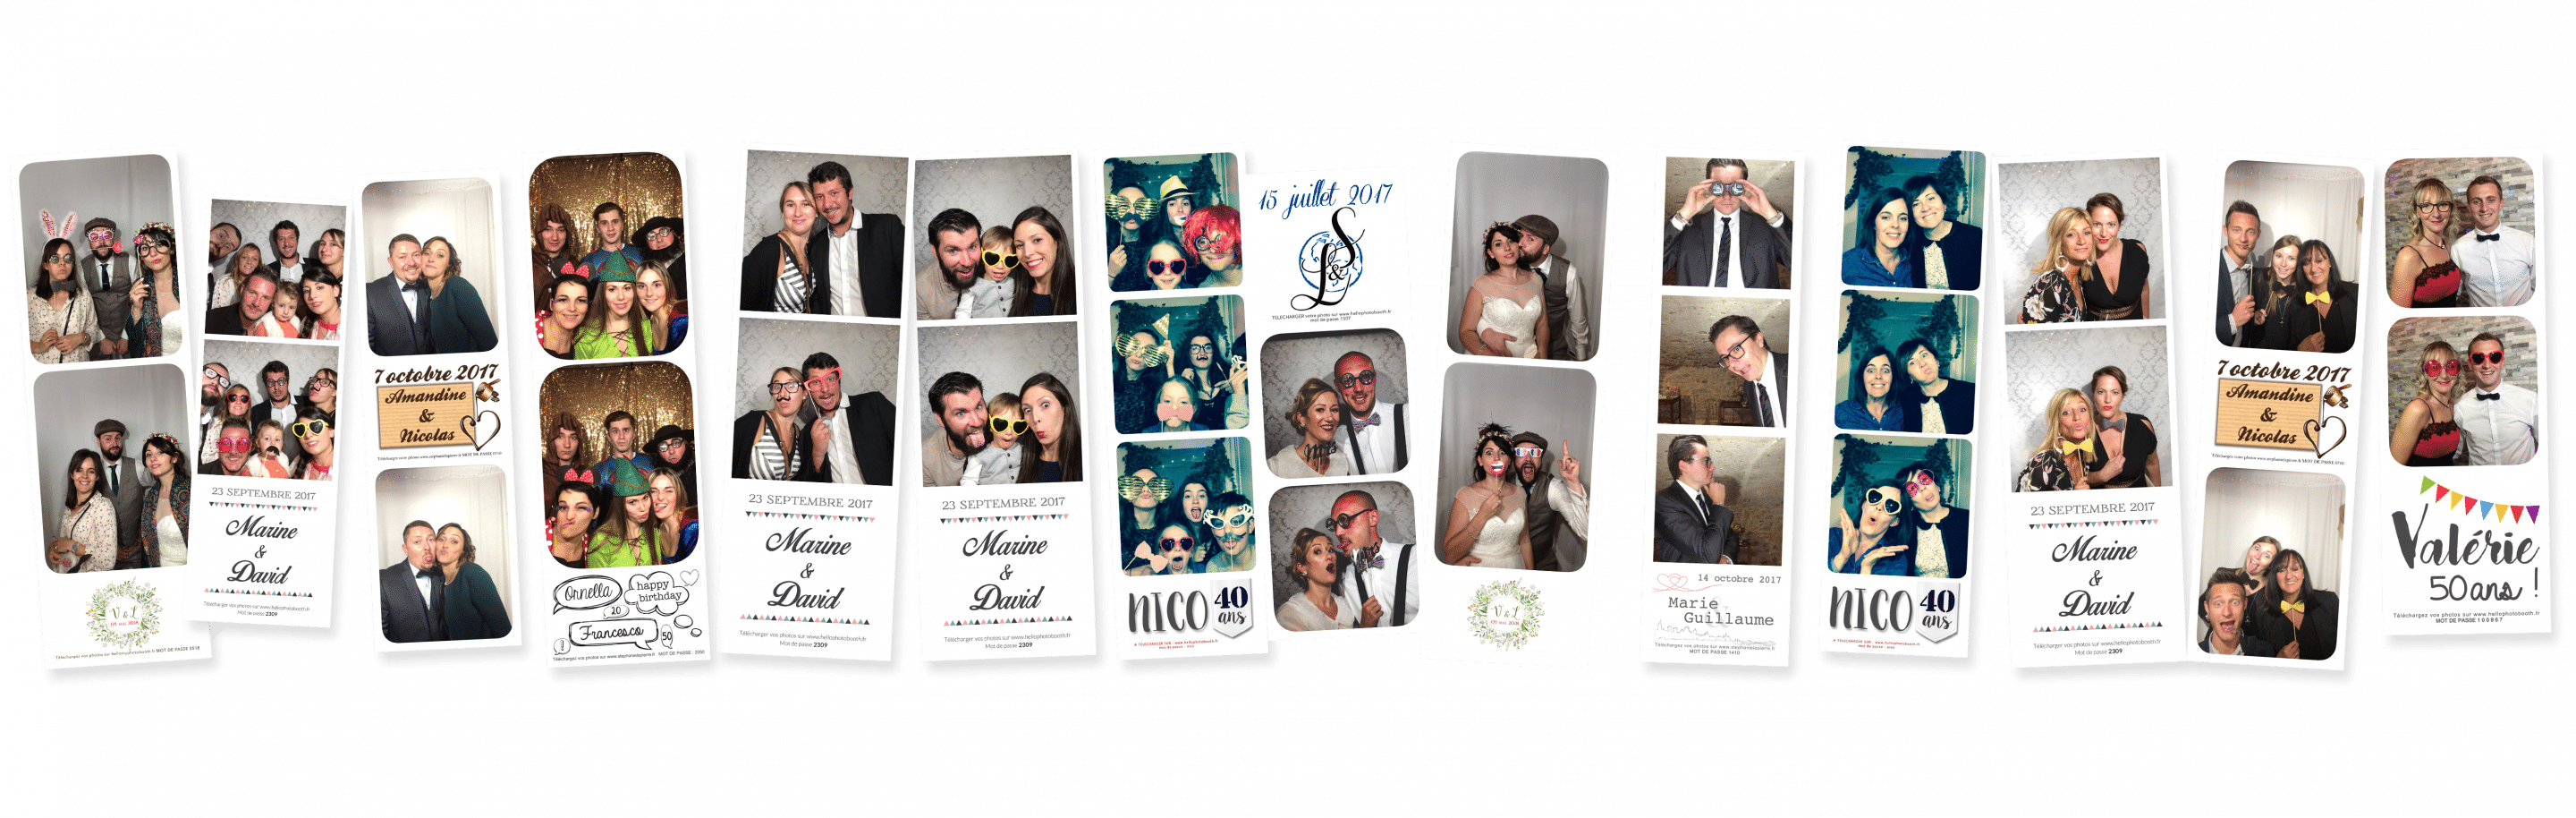 mise-en-page-photobooth-mariage-lyon